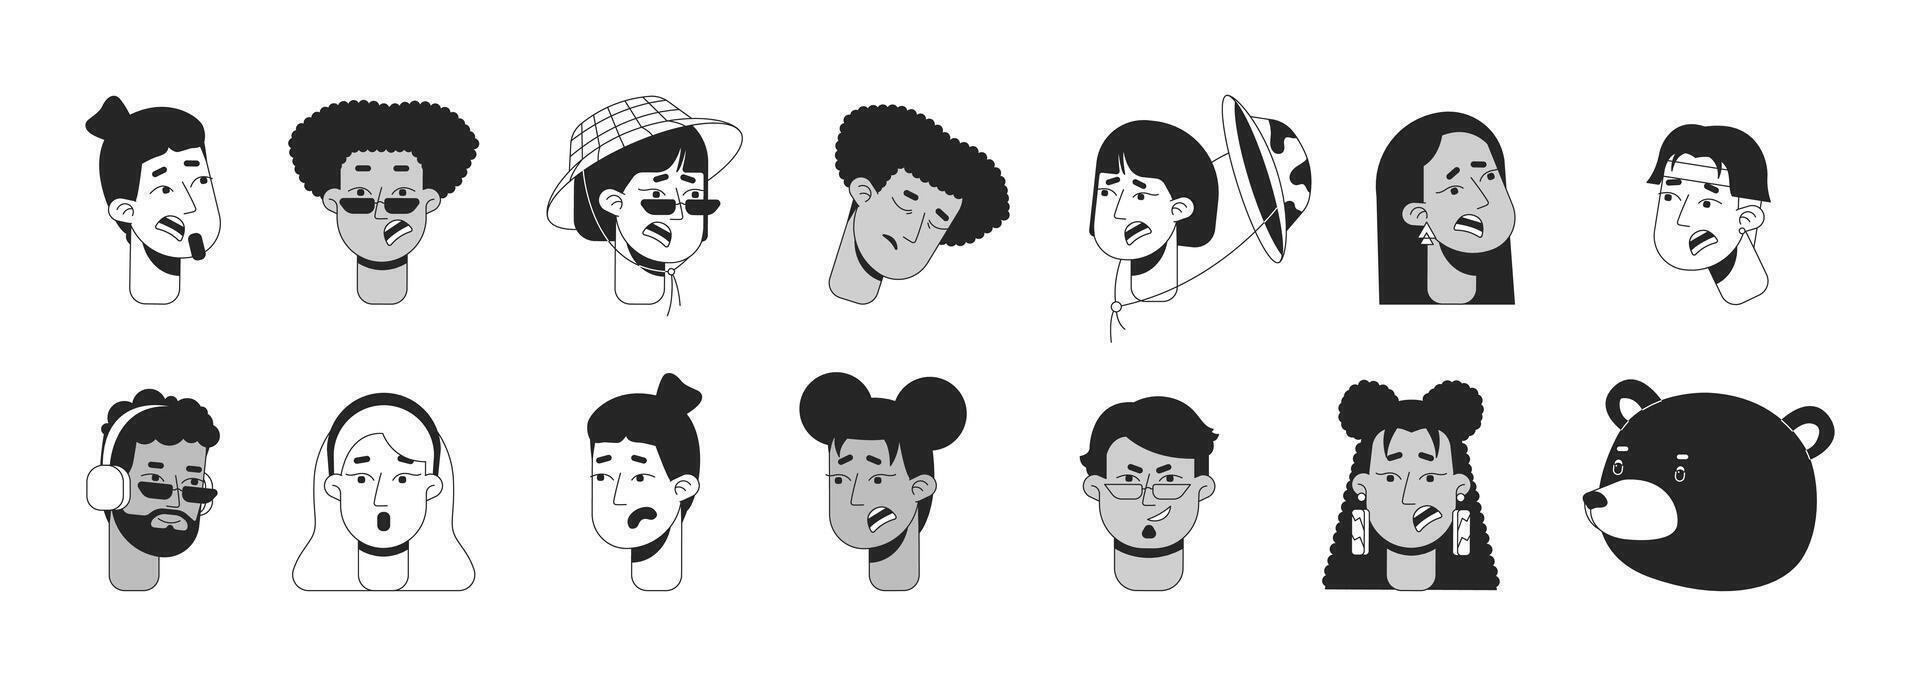 Diverse people and bear black and white 2D avatars illustration set. Emotions expression and animal outline cartoon character faces isolated. Looks flat user profile images collection portraits vector